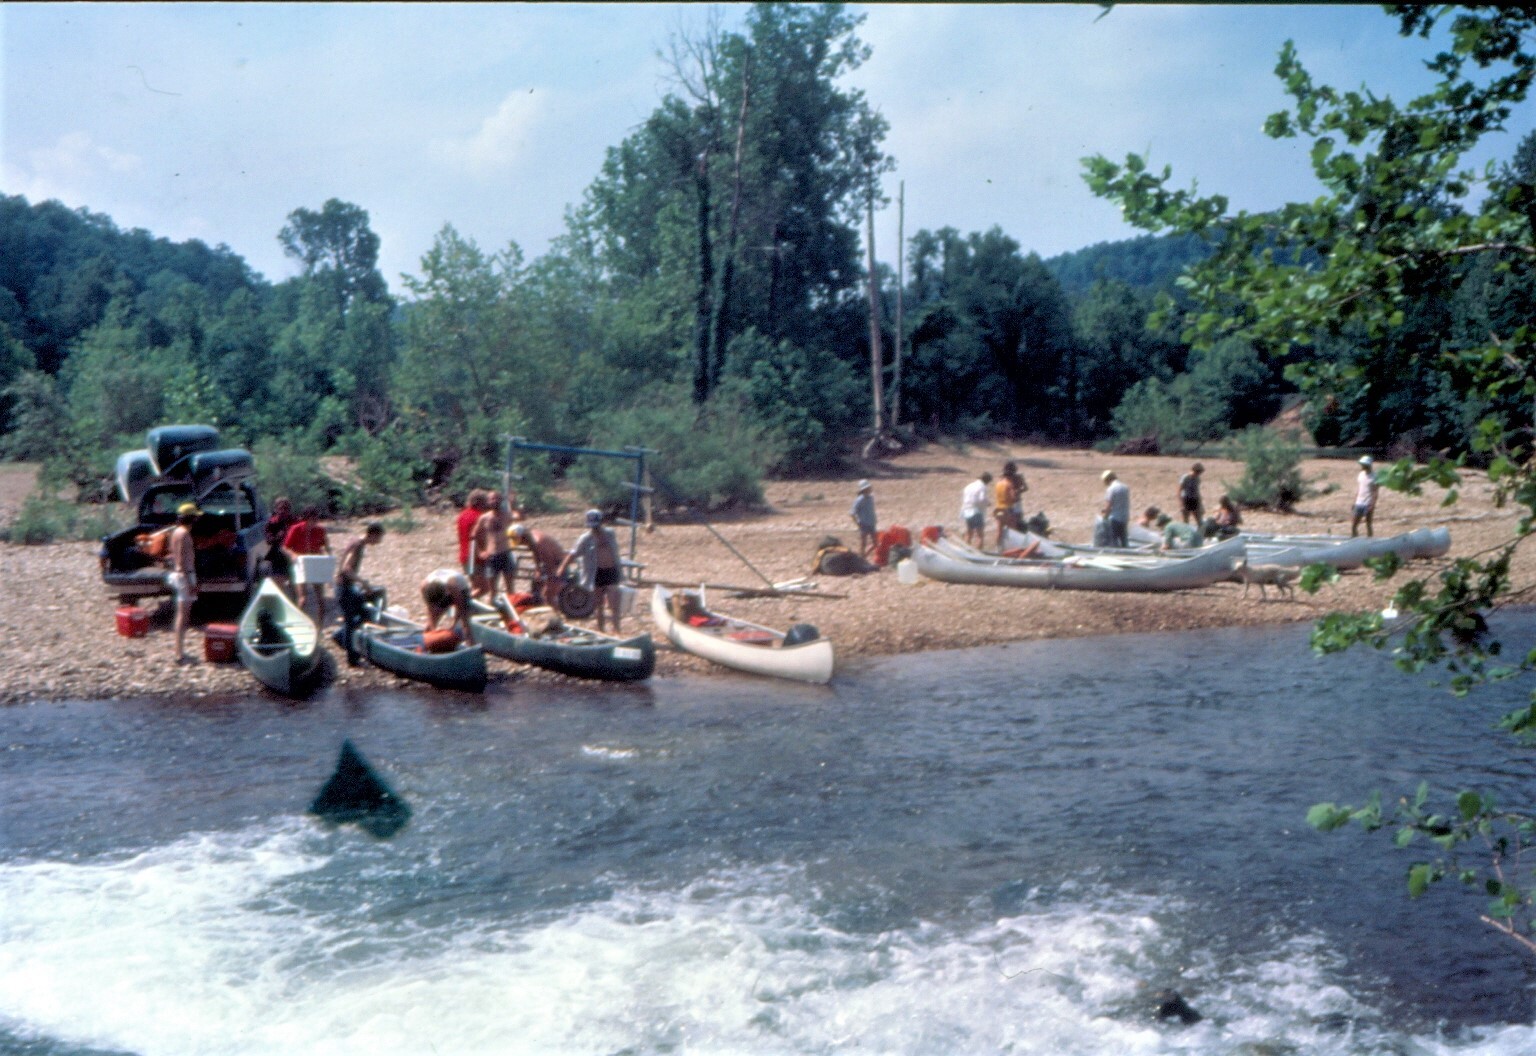 color photo with river in foreground and boats, people and gravel river bank in background.